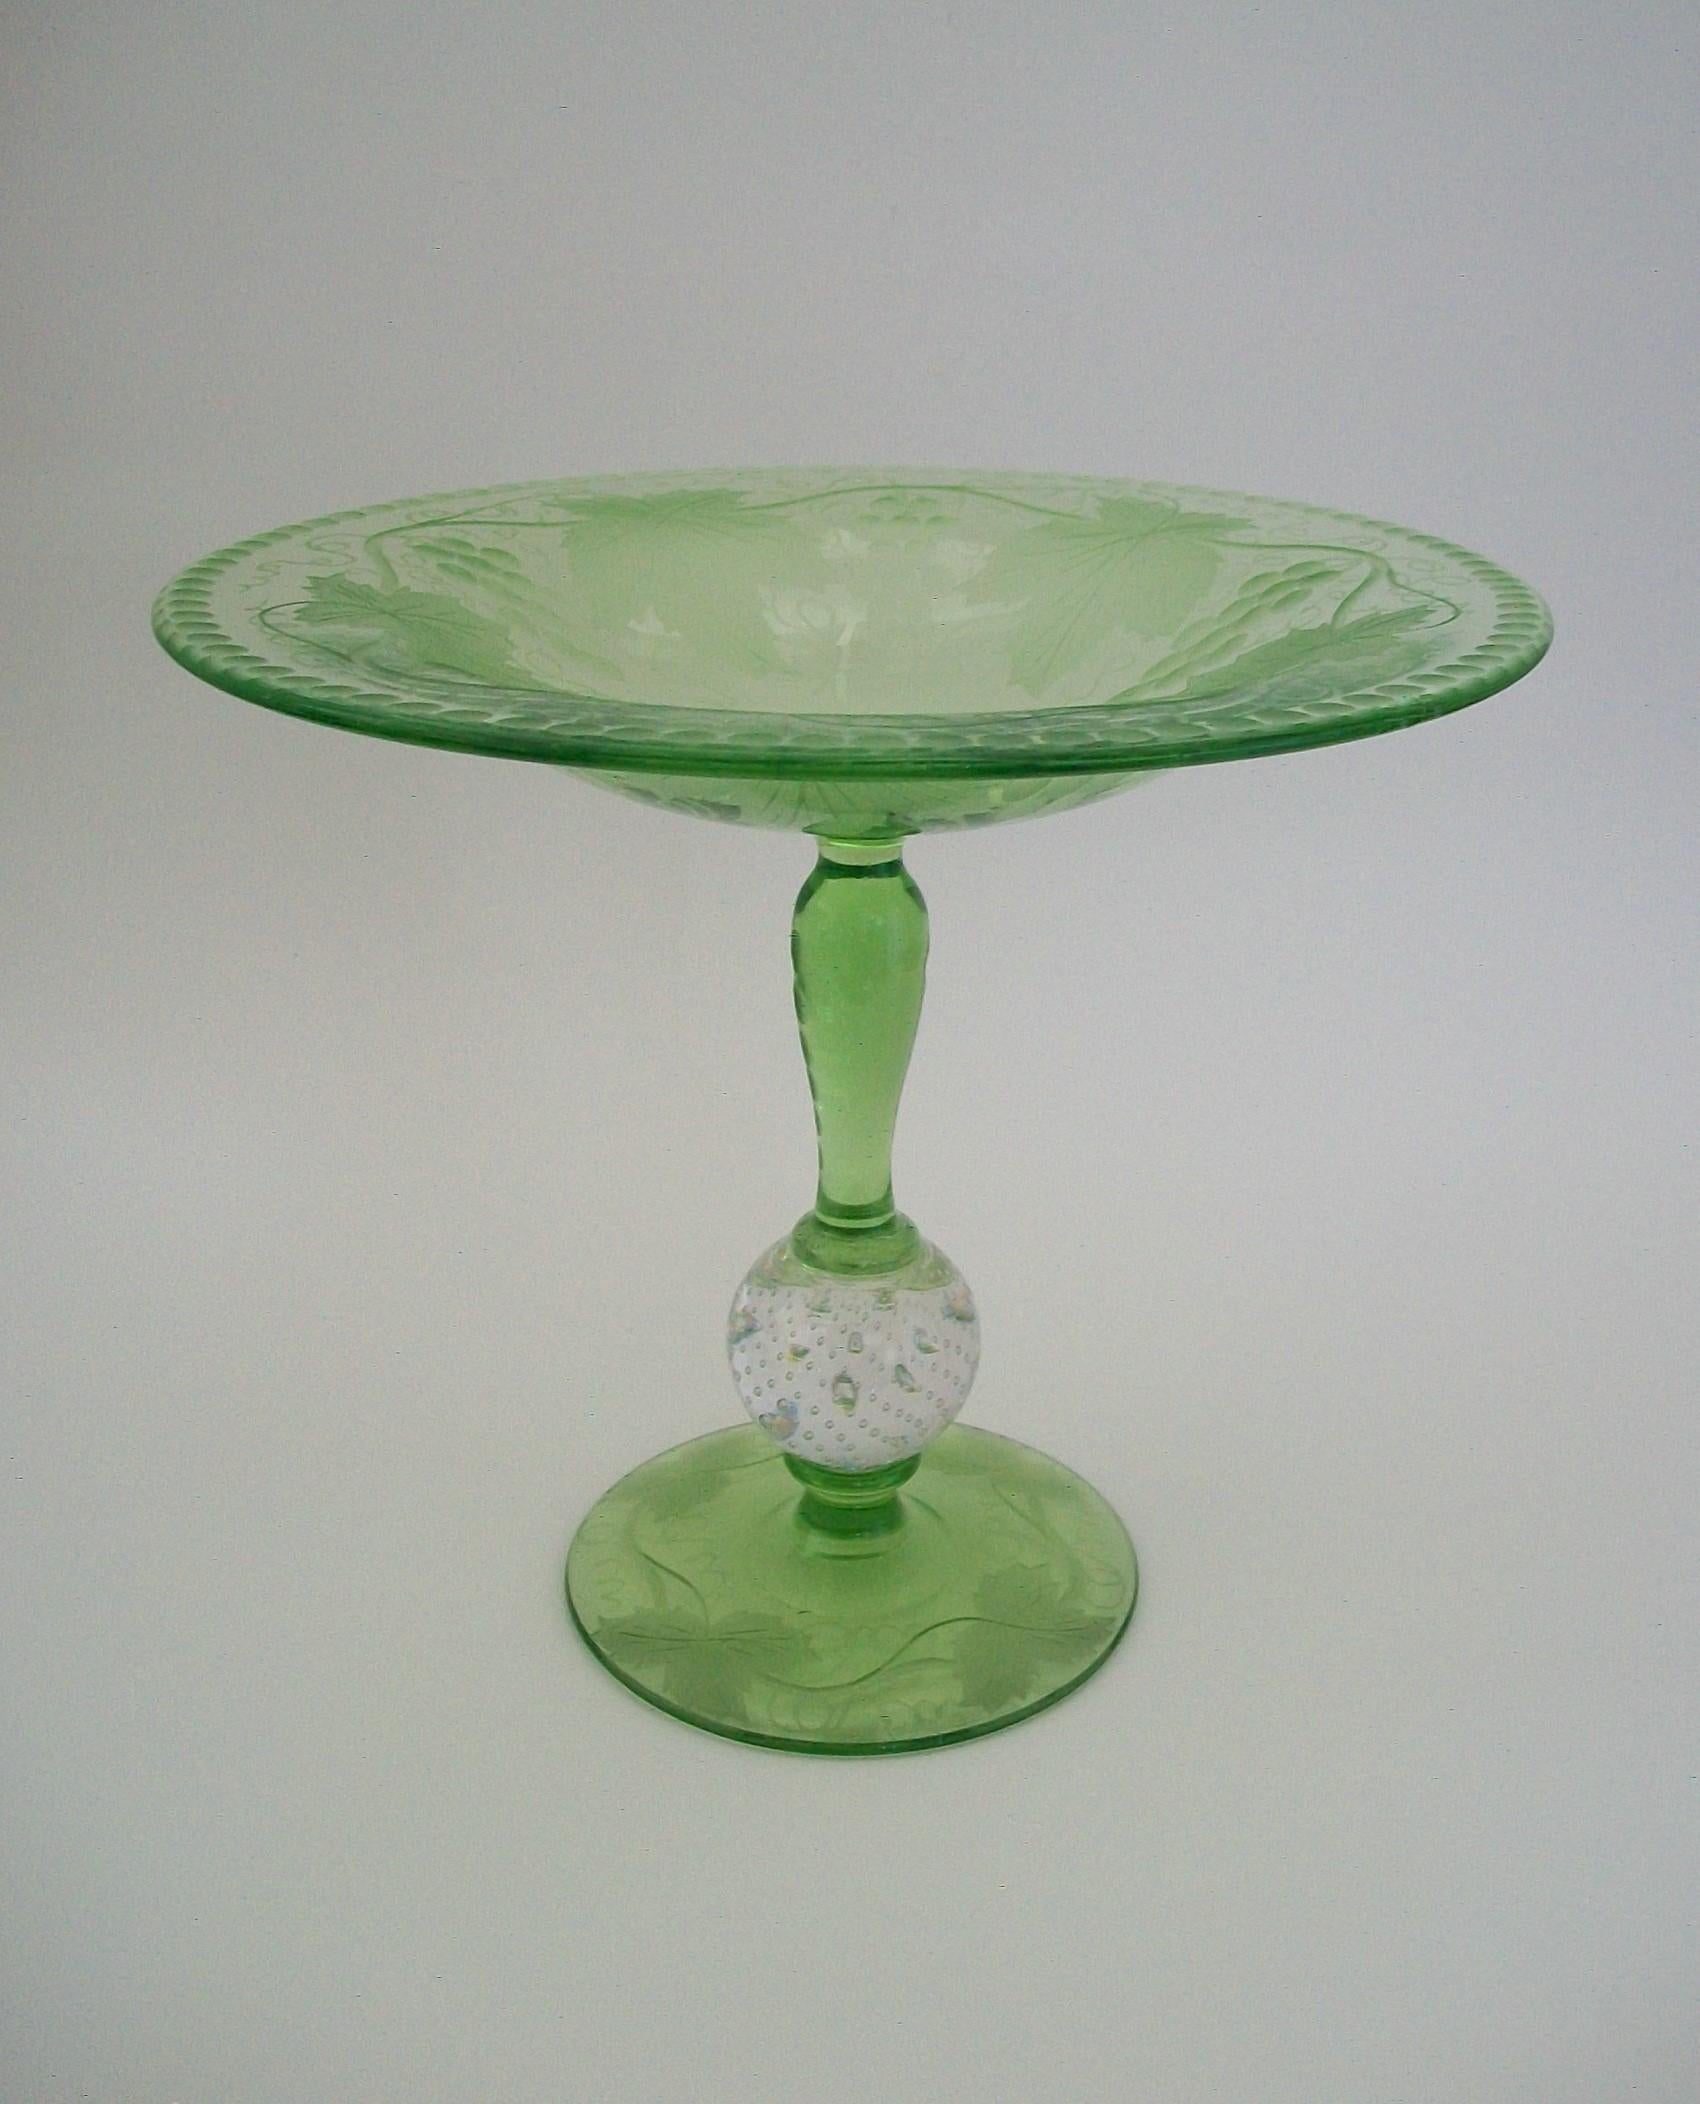 PAIRPOINT - Wheel etched green glass compote - featuring etched grapes, grape leaves and meandering vines to the bowl and base - etched stem and rim - central 'controlled bubble' knop in clear glass - polished finish throughout - unsigned - United